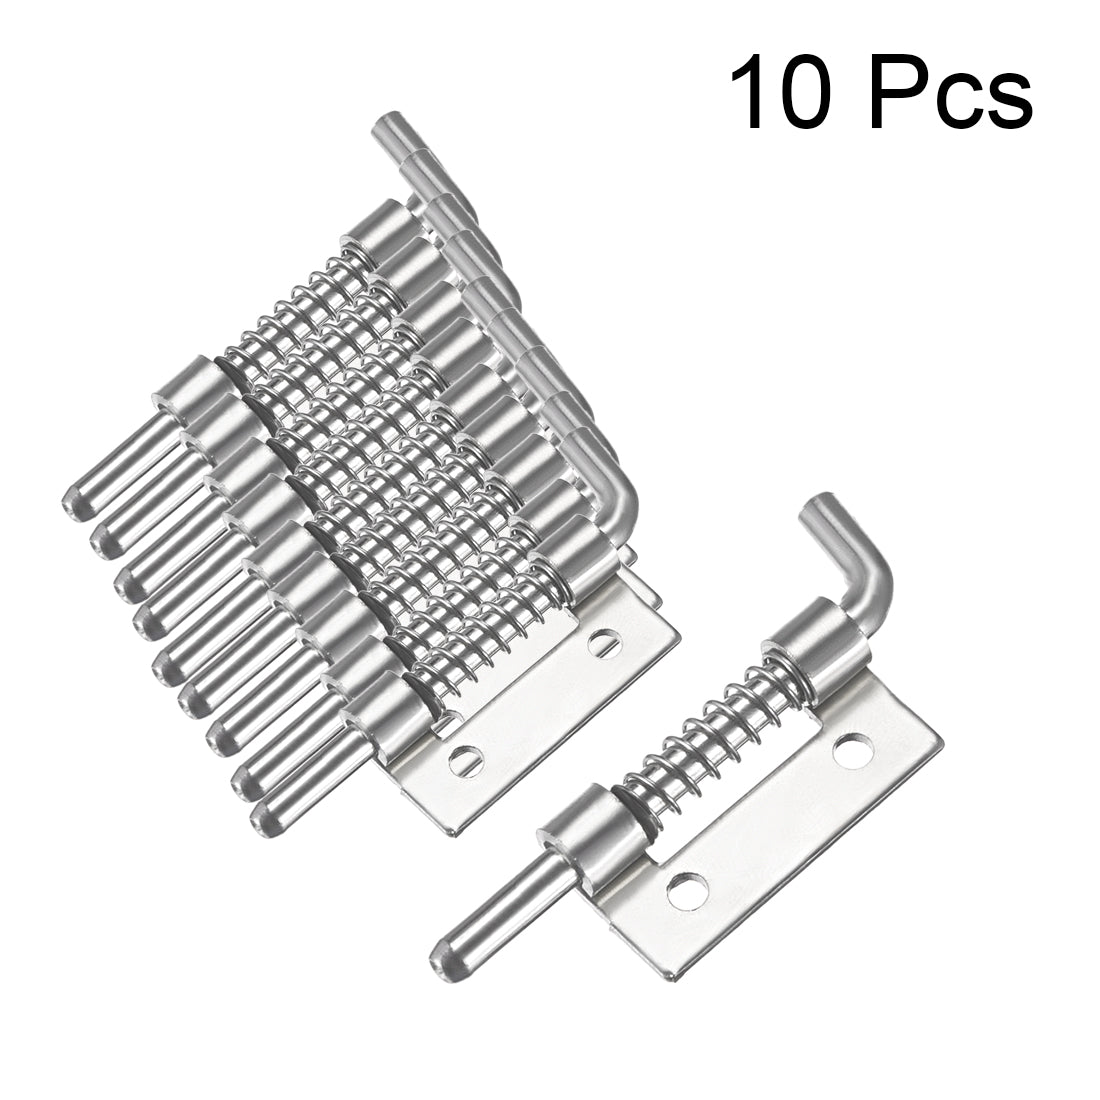 Uxcell Uxcell 10pcs Carbon Steel Lock Bolt Spring Loaded Pin Latch 52mm Long (Left)